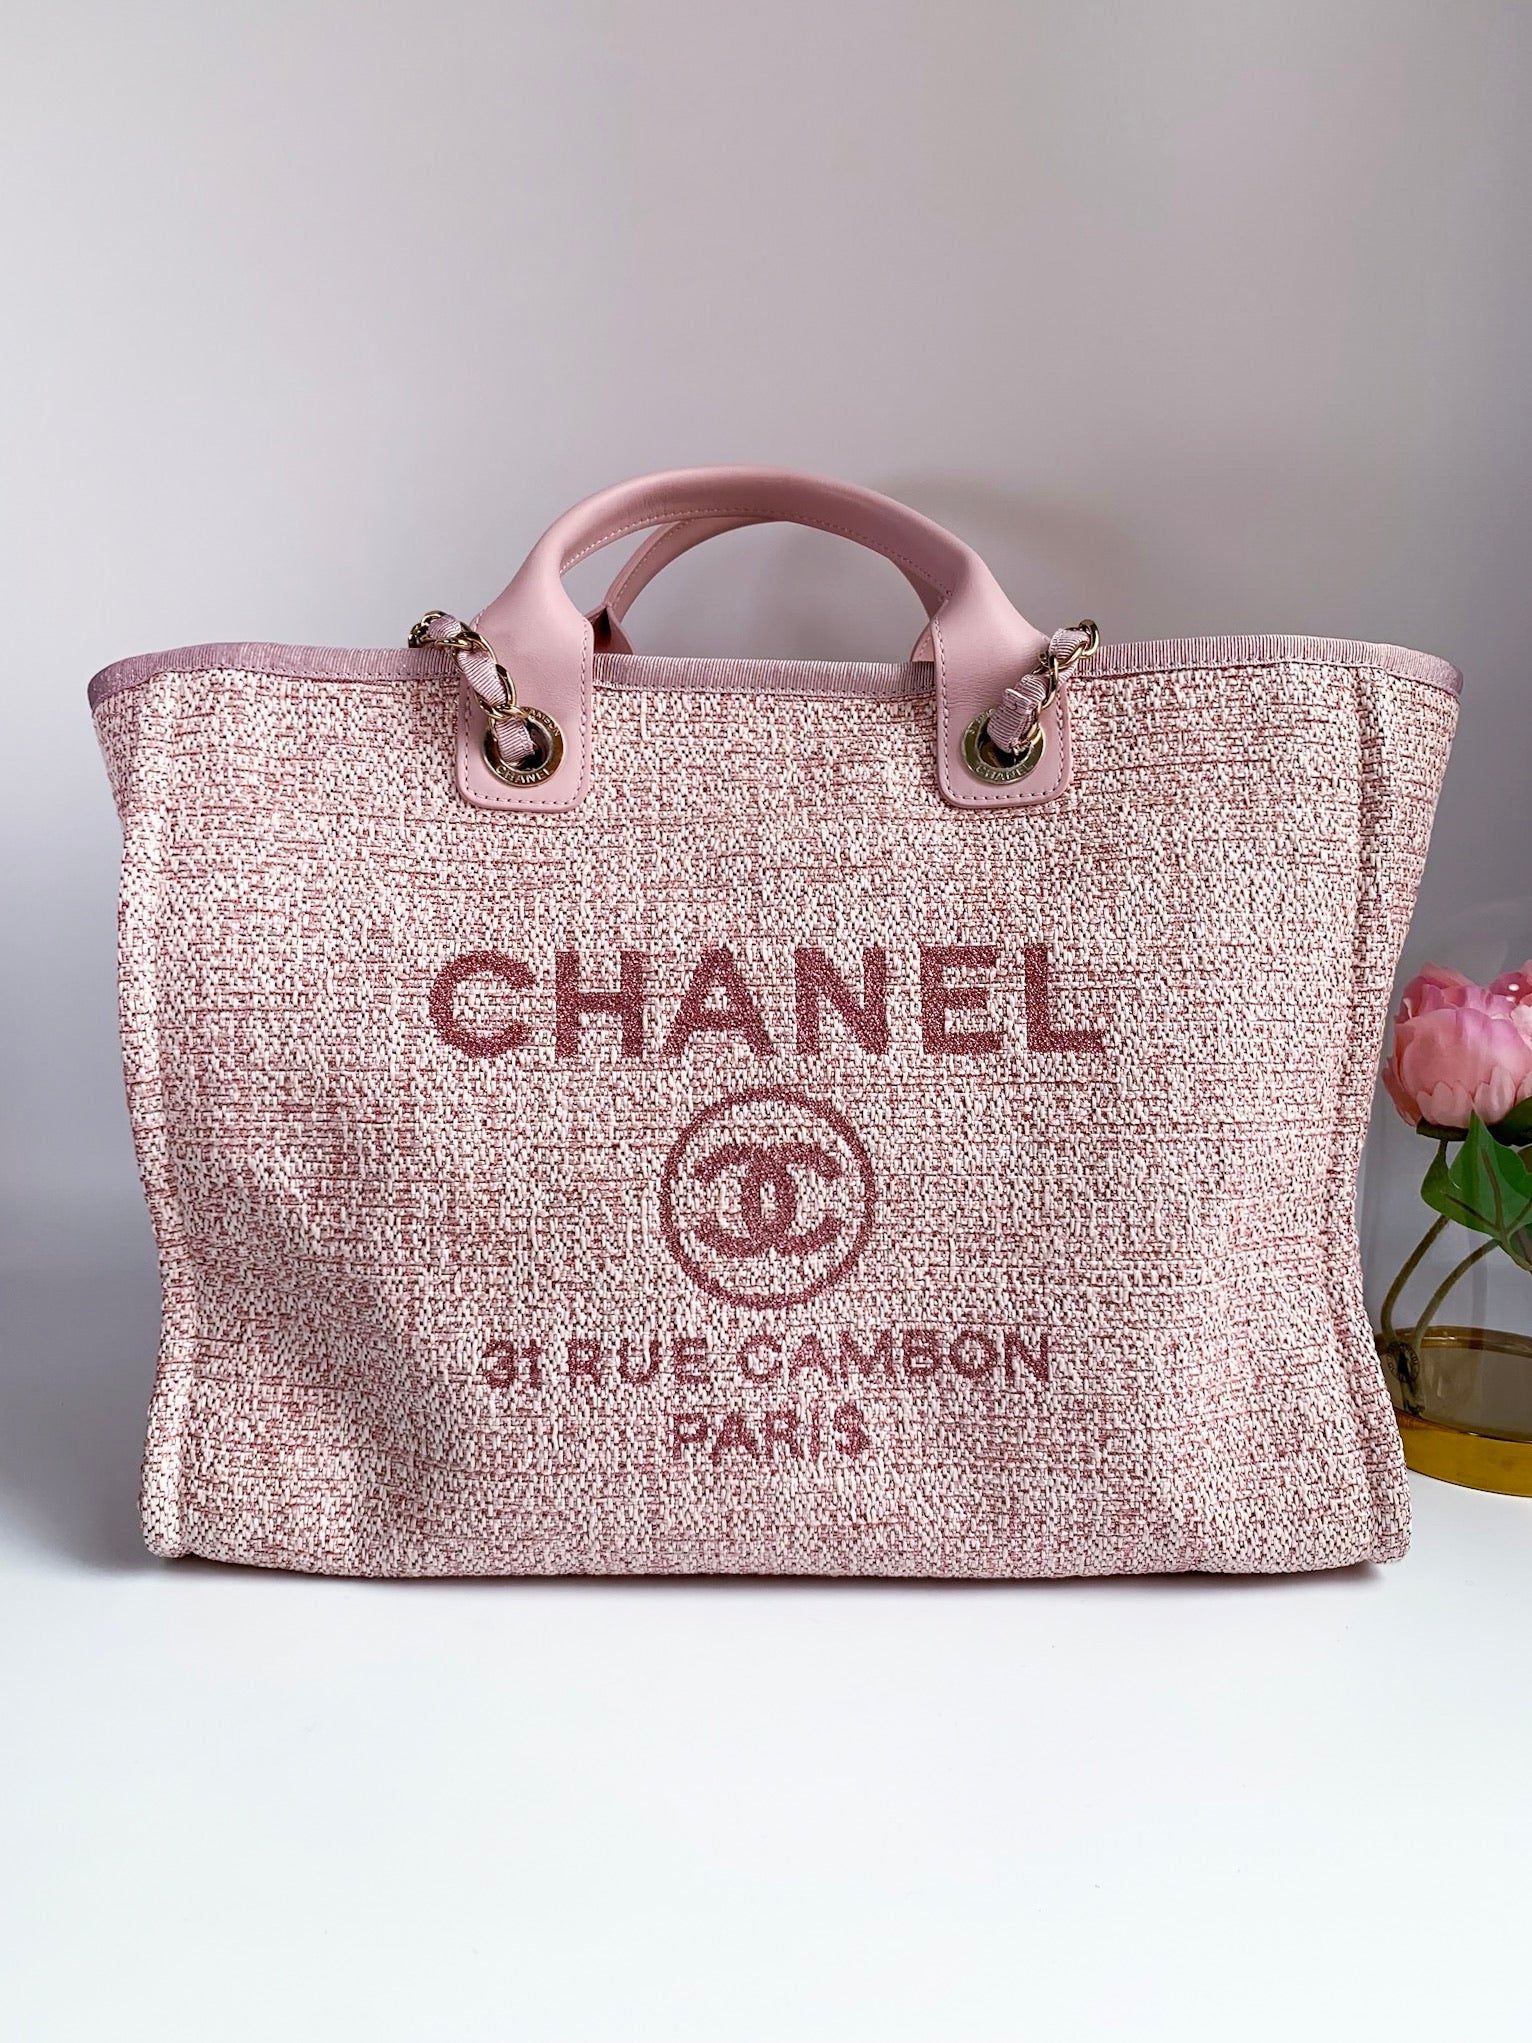 chanel canvas tote pink